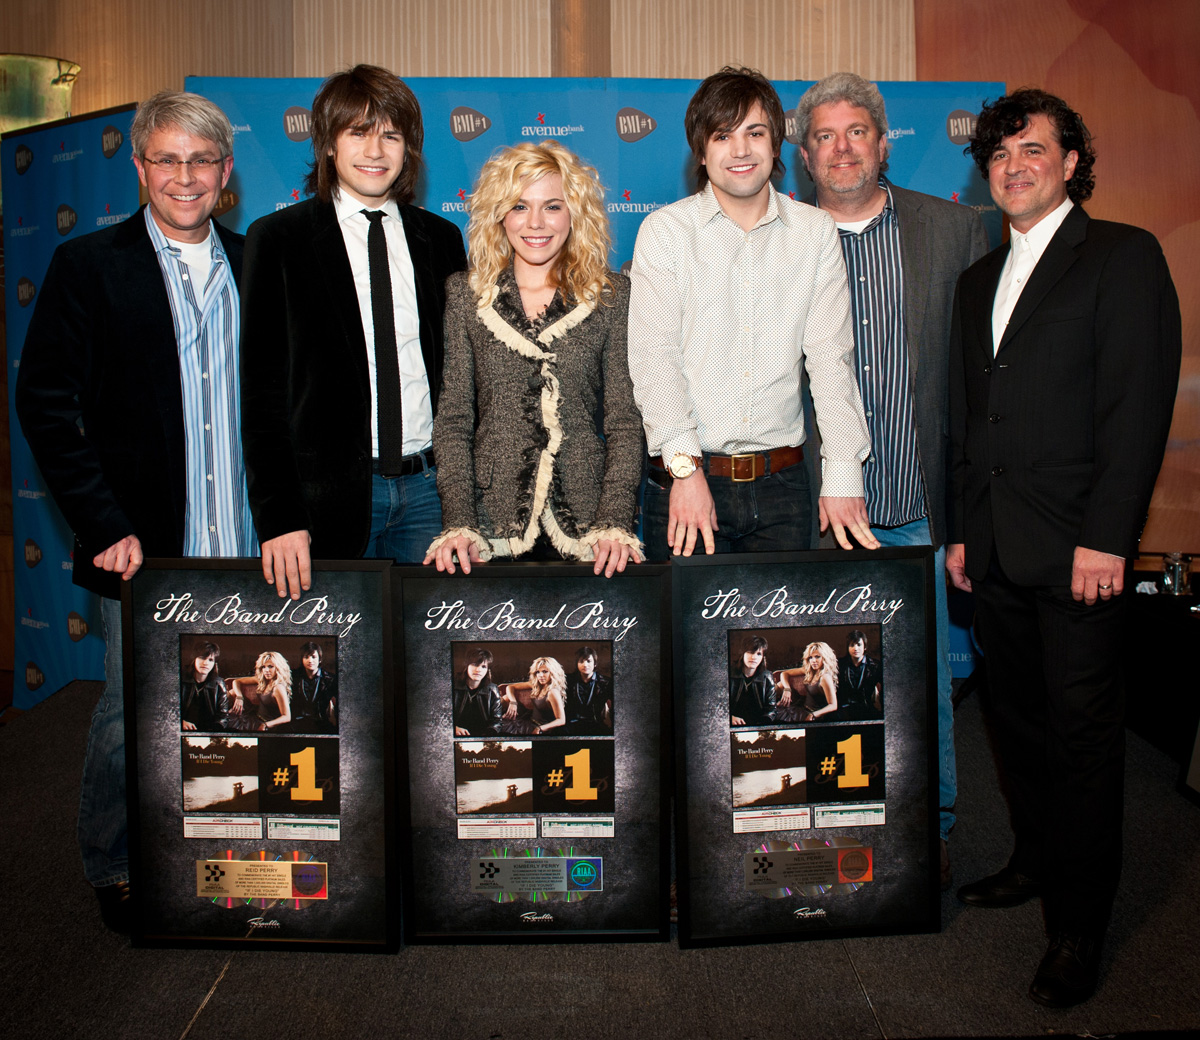 The Band Perry celebrates first #1